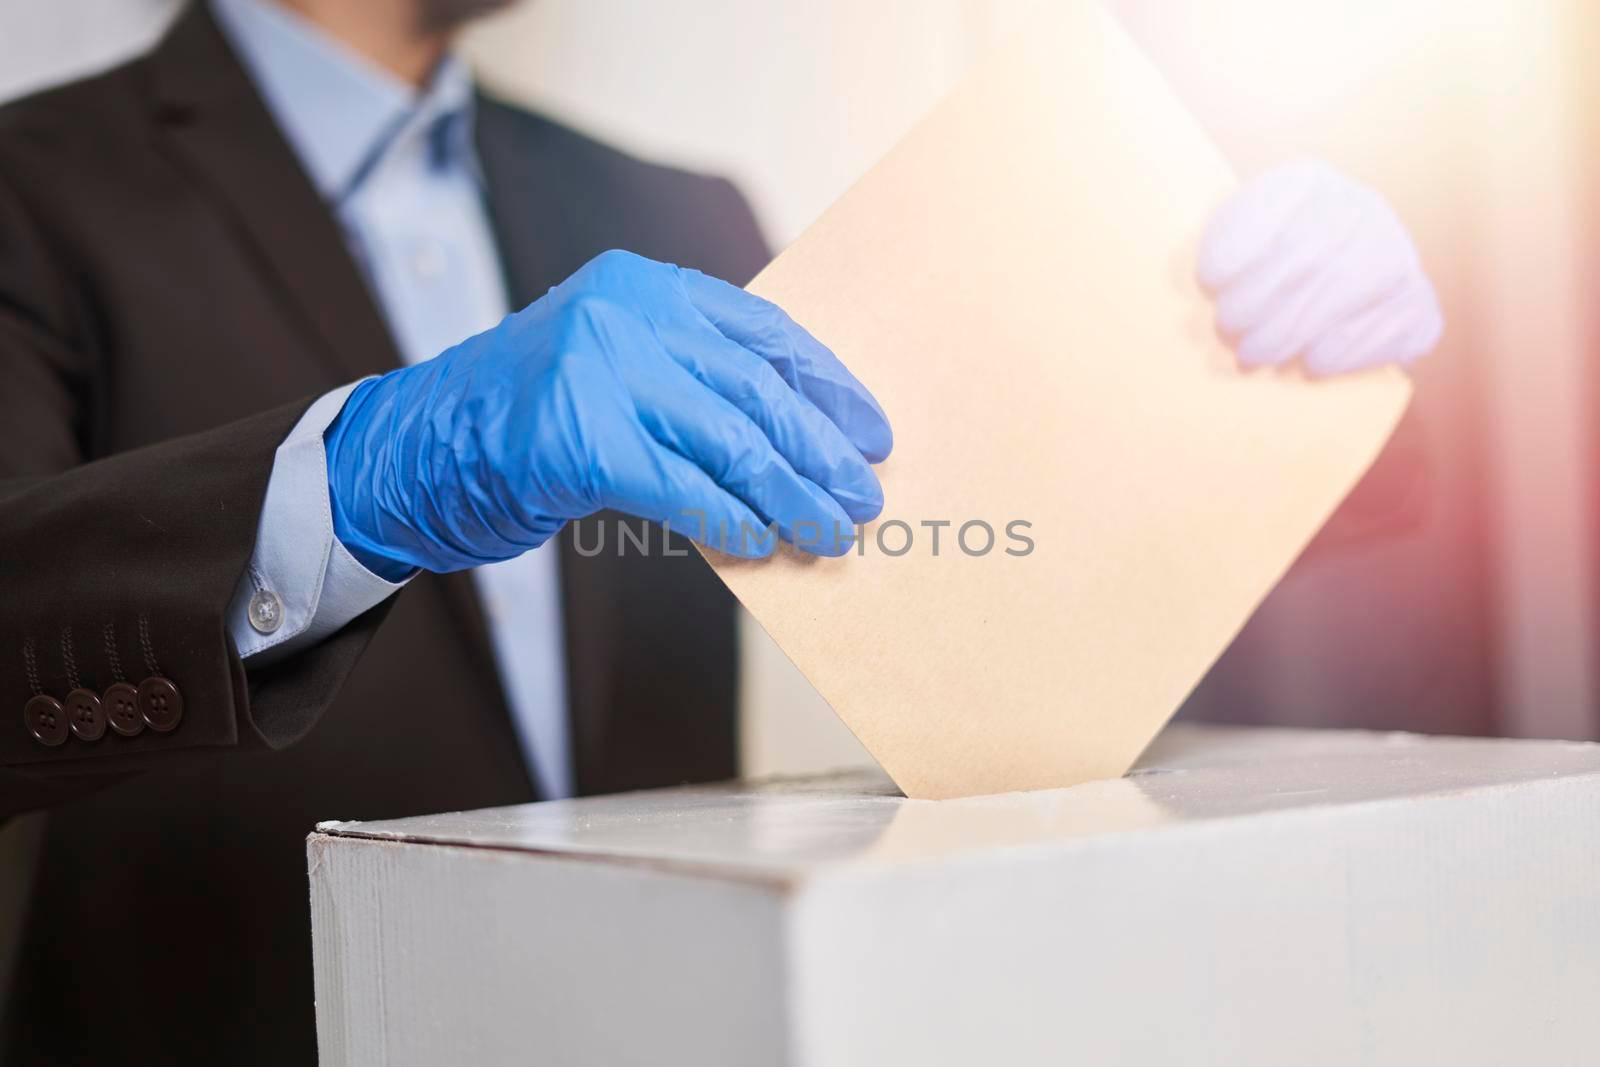 A person in medical gloves voting. Election concept. Presidential or Parliament election. A voter putting an election ballot into the box. Election during COVID-19 pandemic